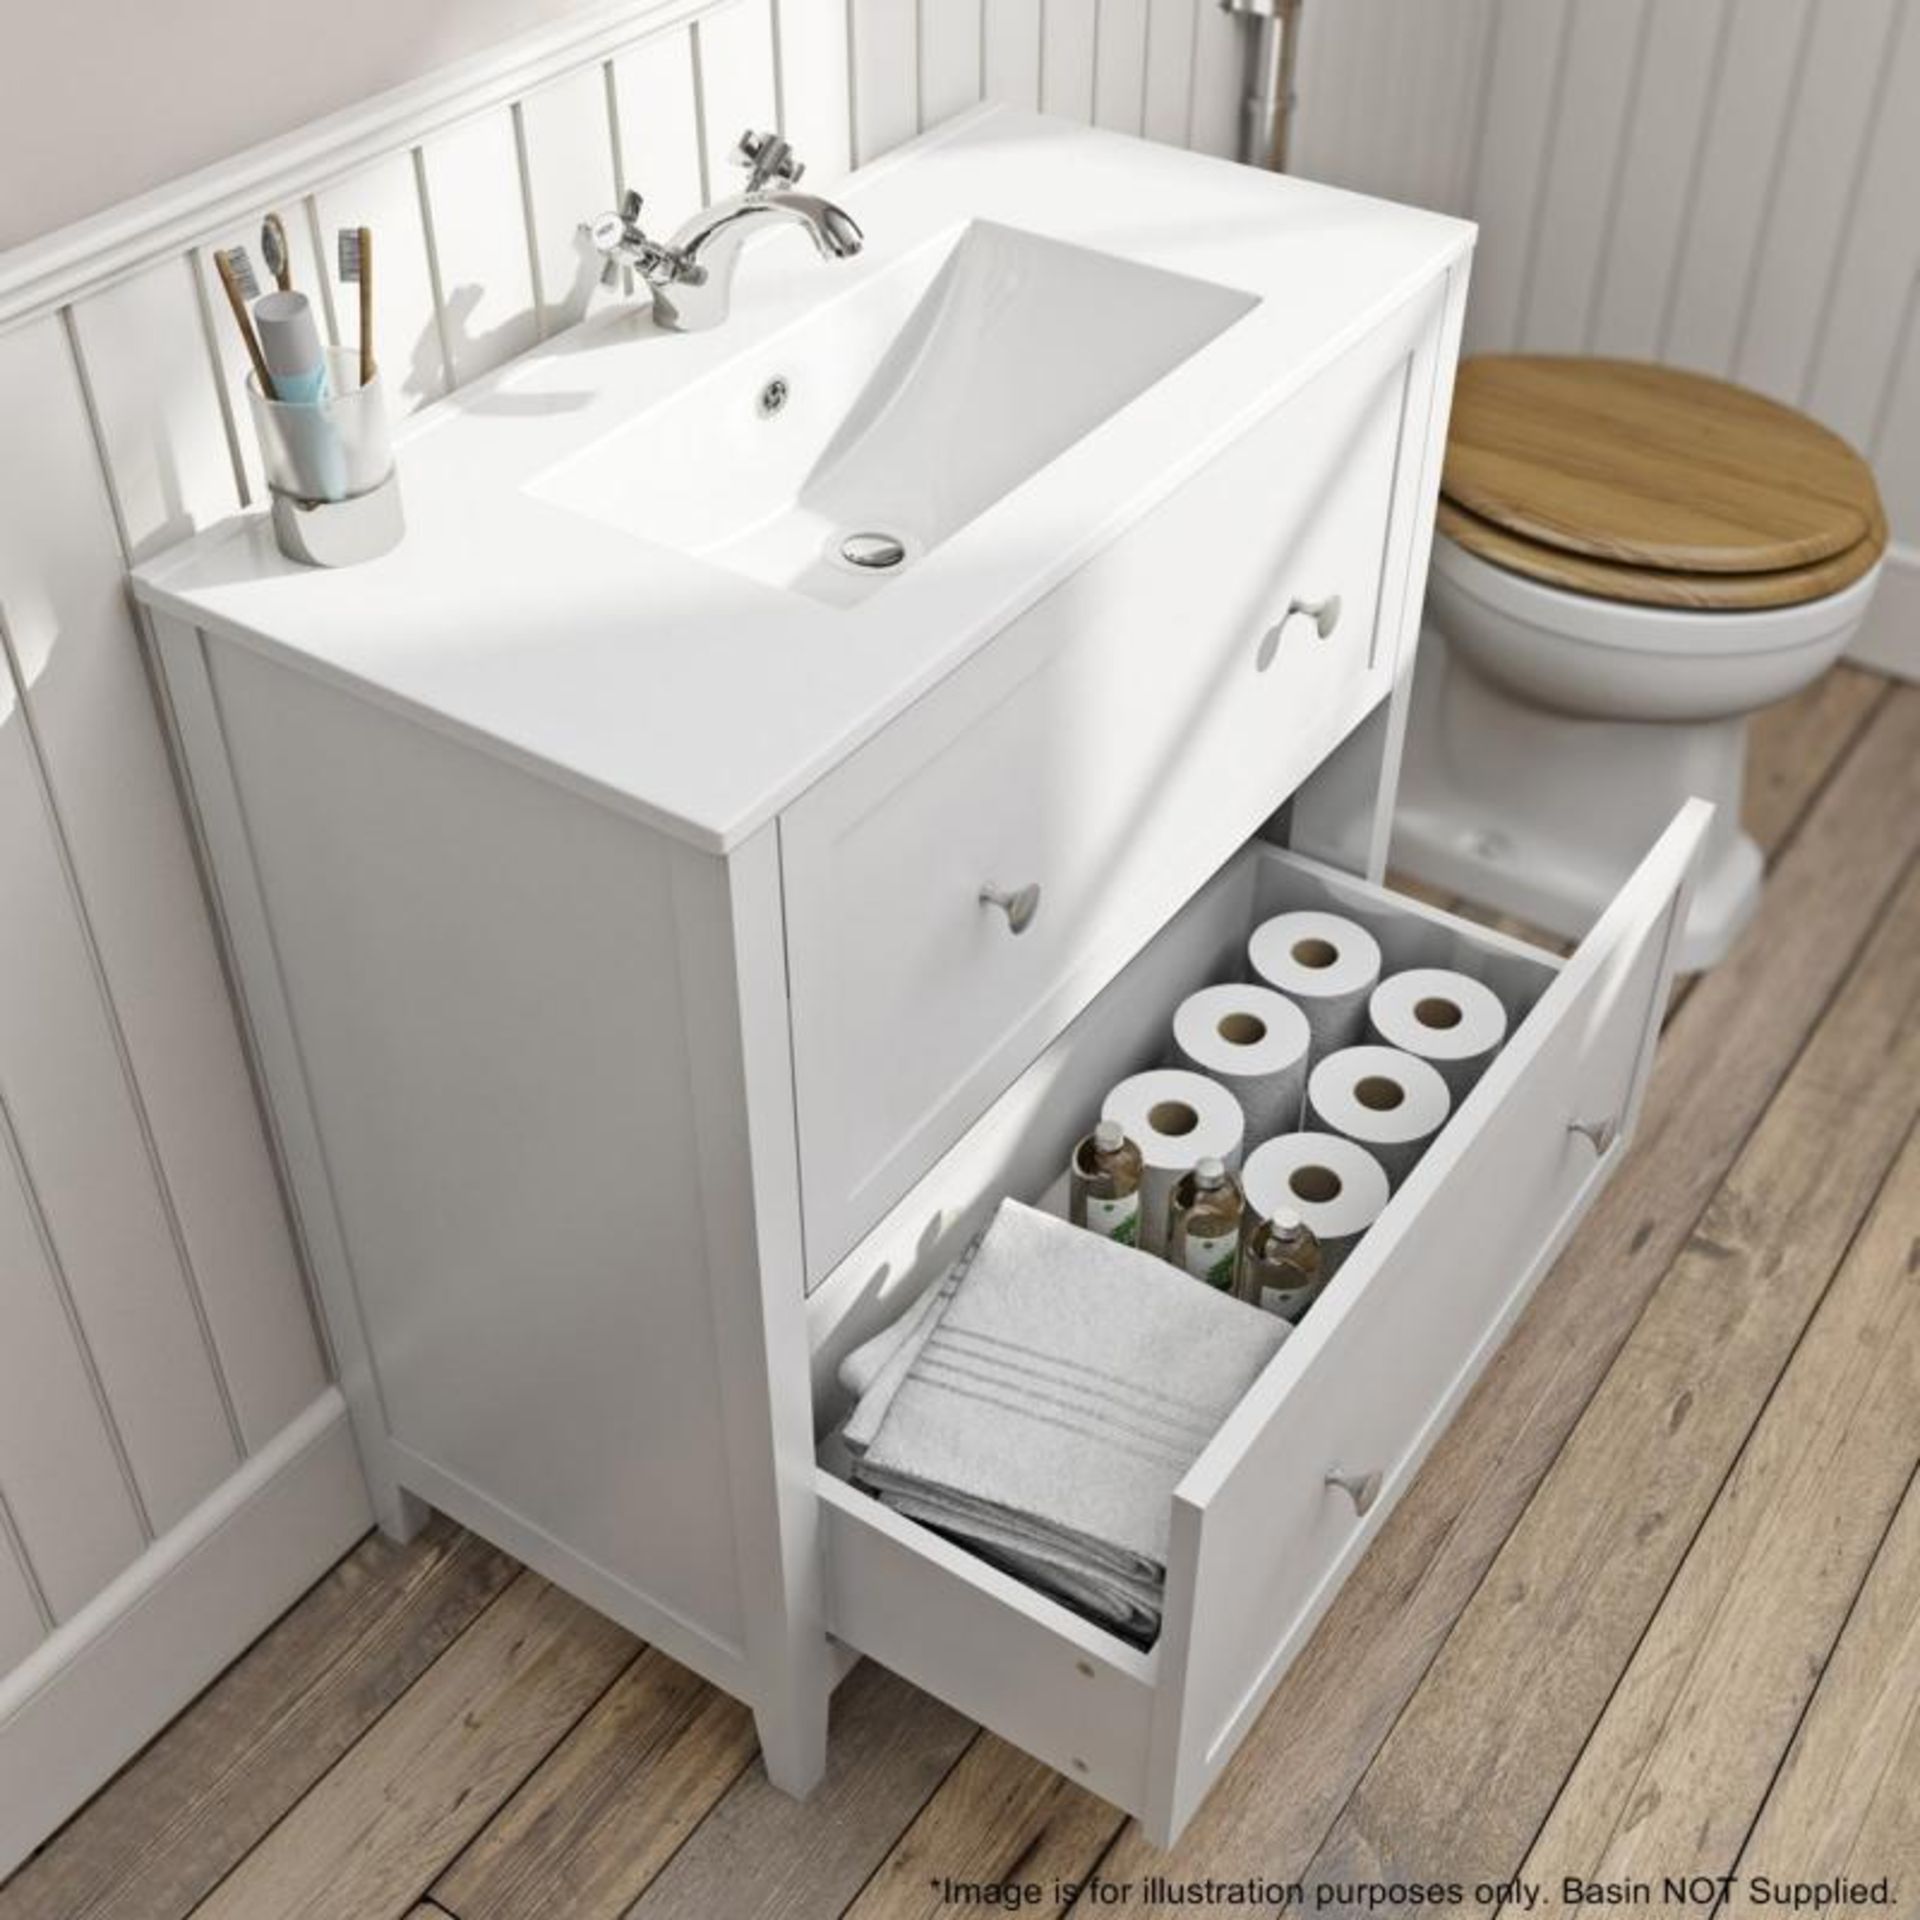 1 x Camberley 800 2-Drawer Soft Close Vanity Unit In White - New / Unused Stock - Dimensions: W80 x - Image 6 of 7